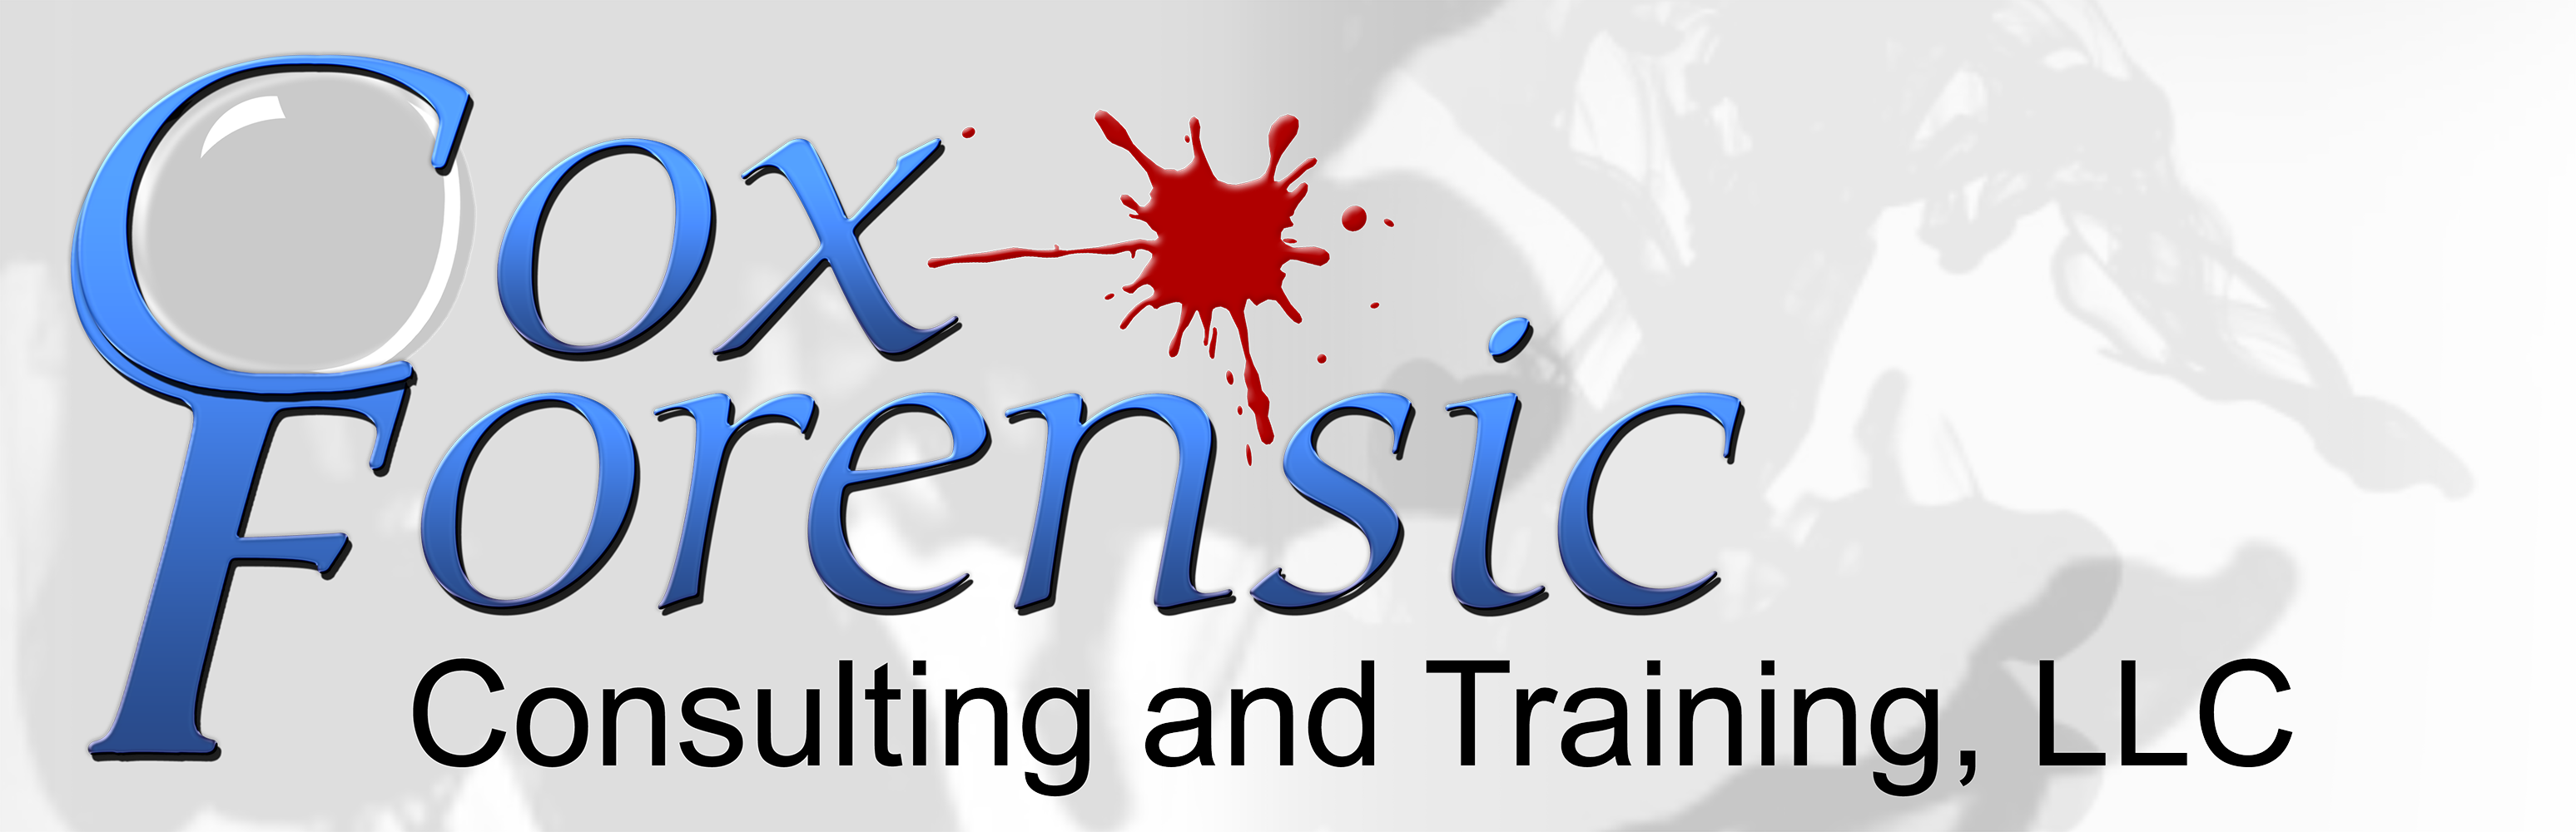 Cox Forensic Consulting and Training, LLC